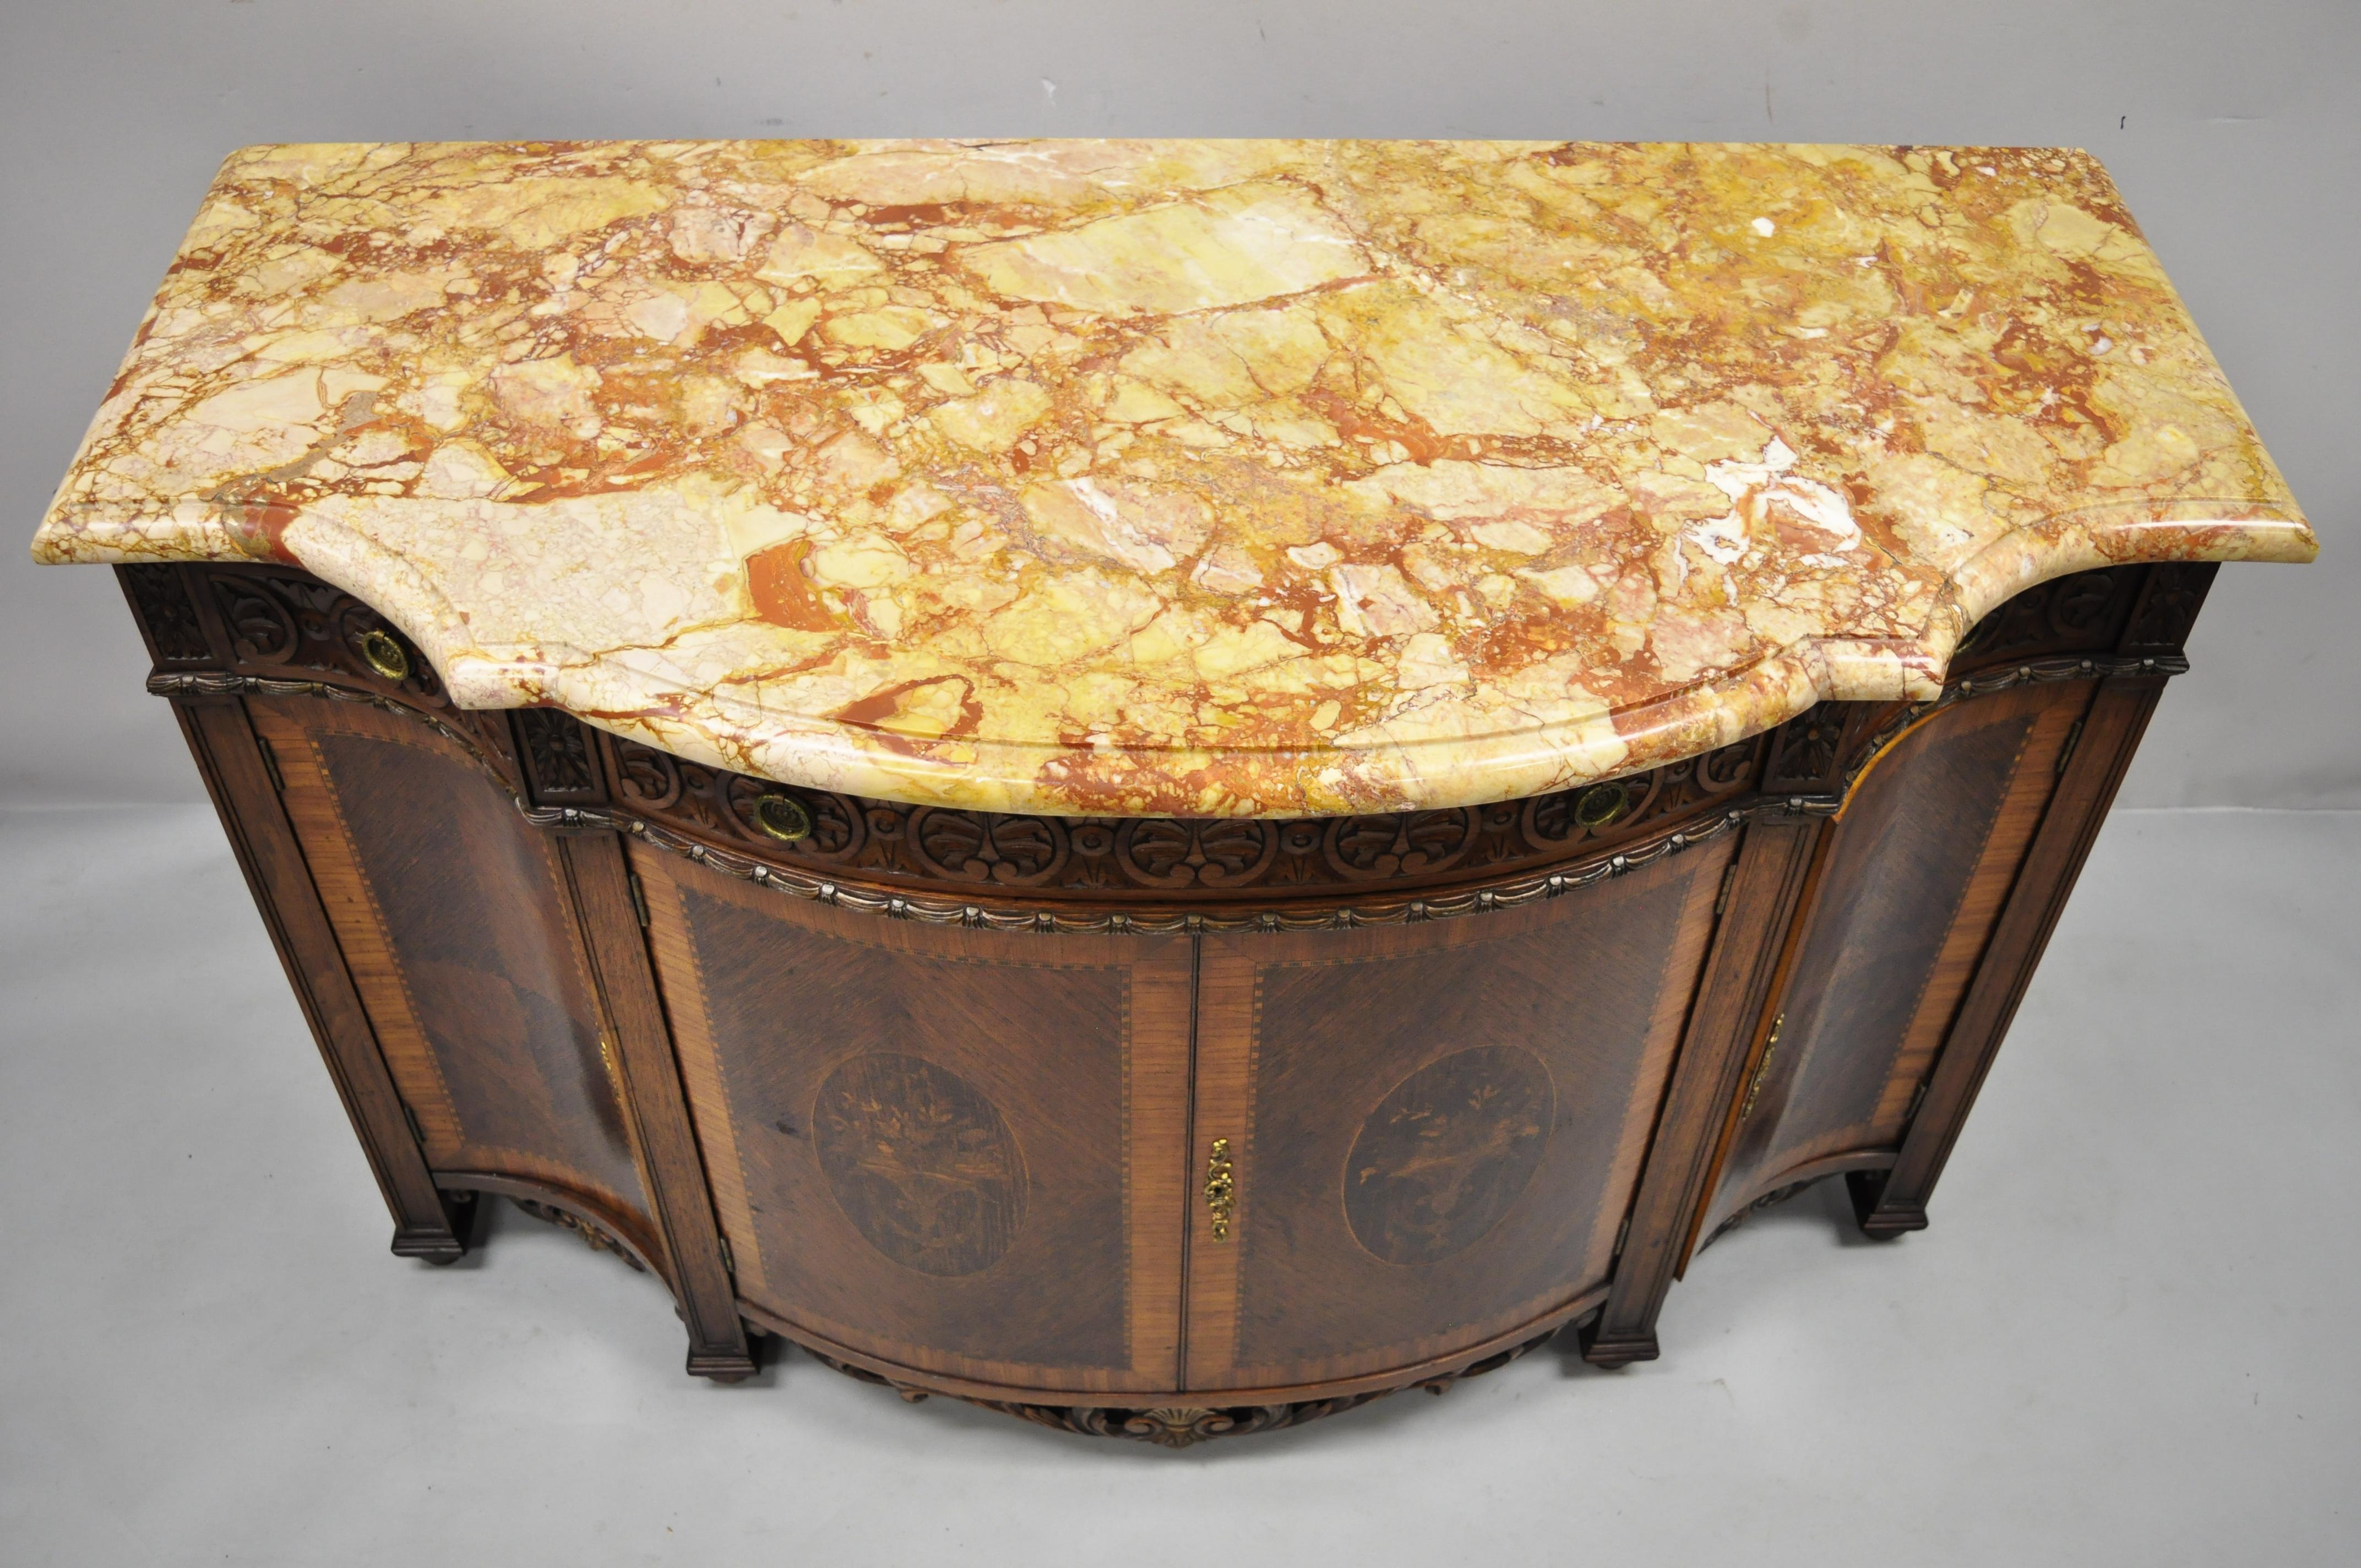 Antique French Renaissance Louis XV style marble top marquetry inlay serpentine buffet sideboard cabinet. Item features shaped rouge marble top, marquetry and floral inlay, serpentine front, nicely carved details, 2 swing doors, 6 dovetailed